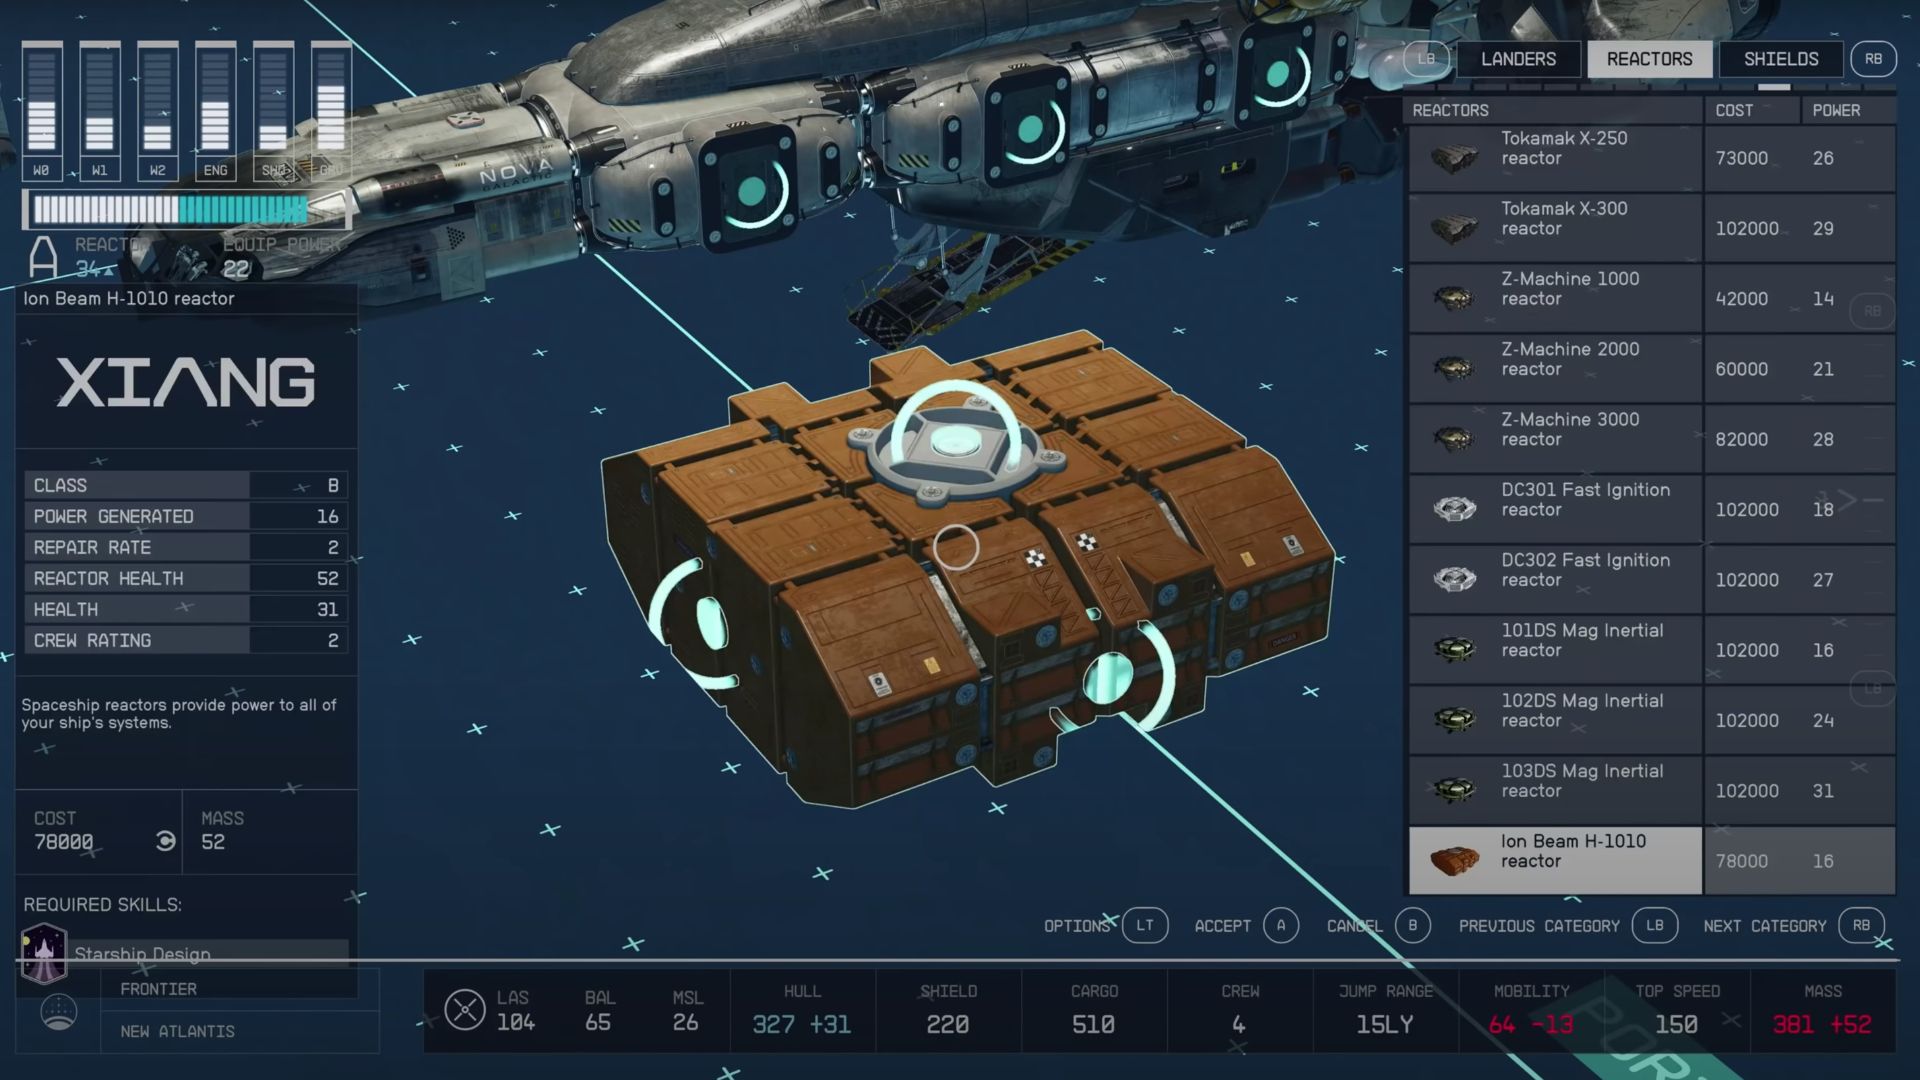 Starfield Ship Customization: The Reactors can be seen